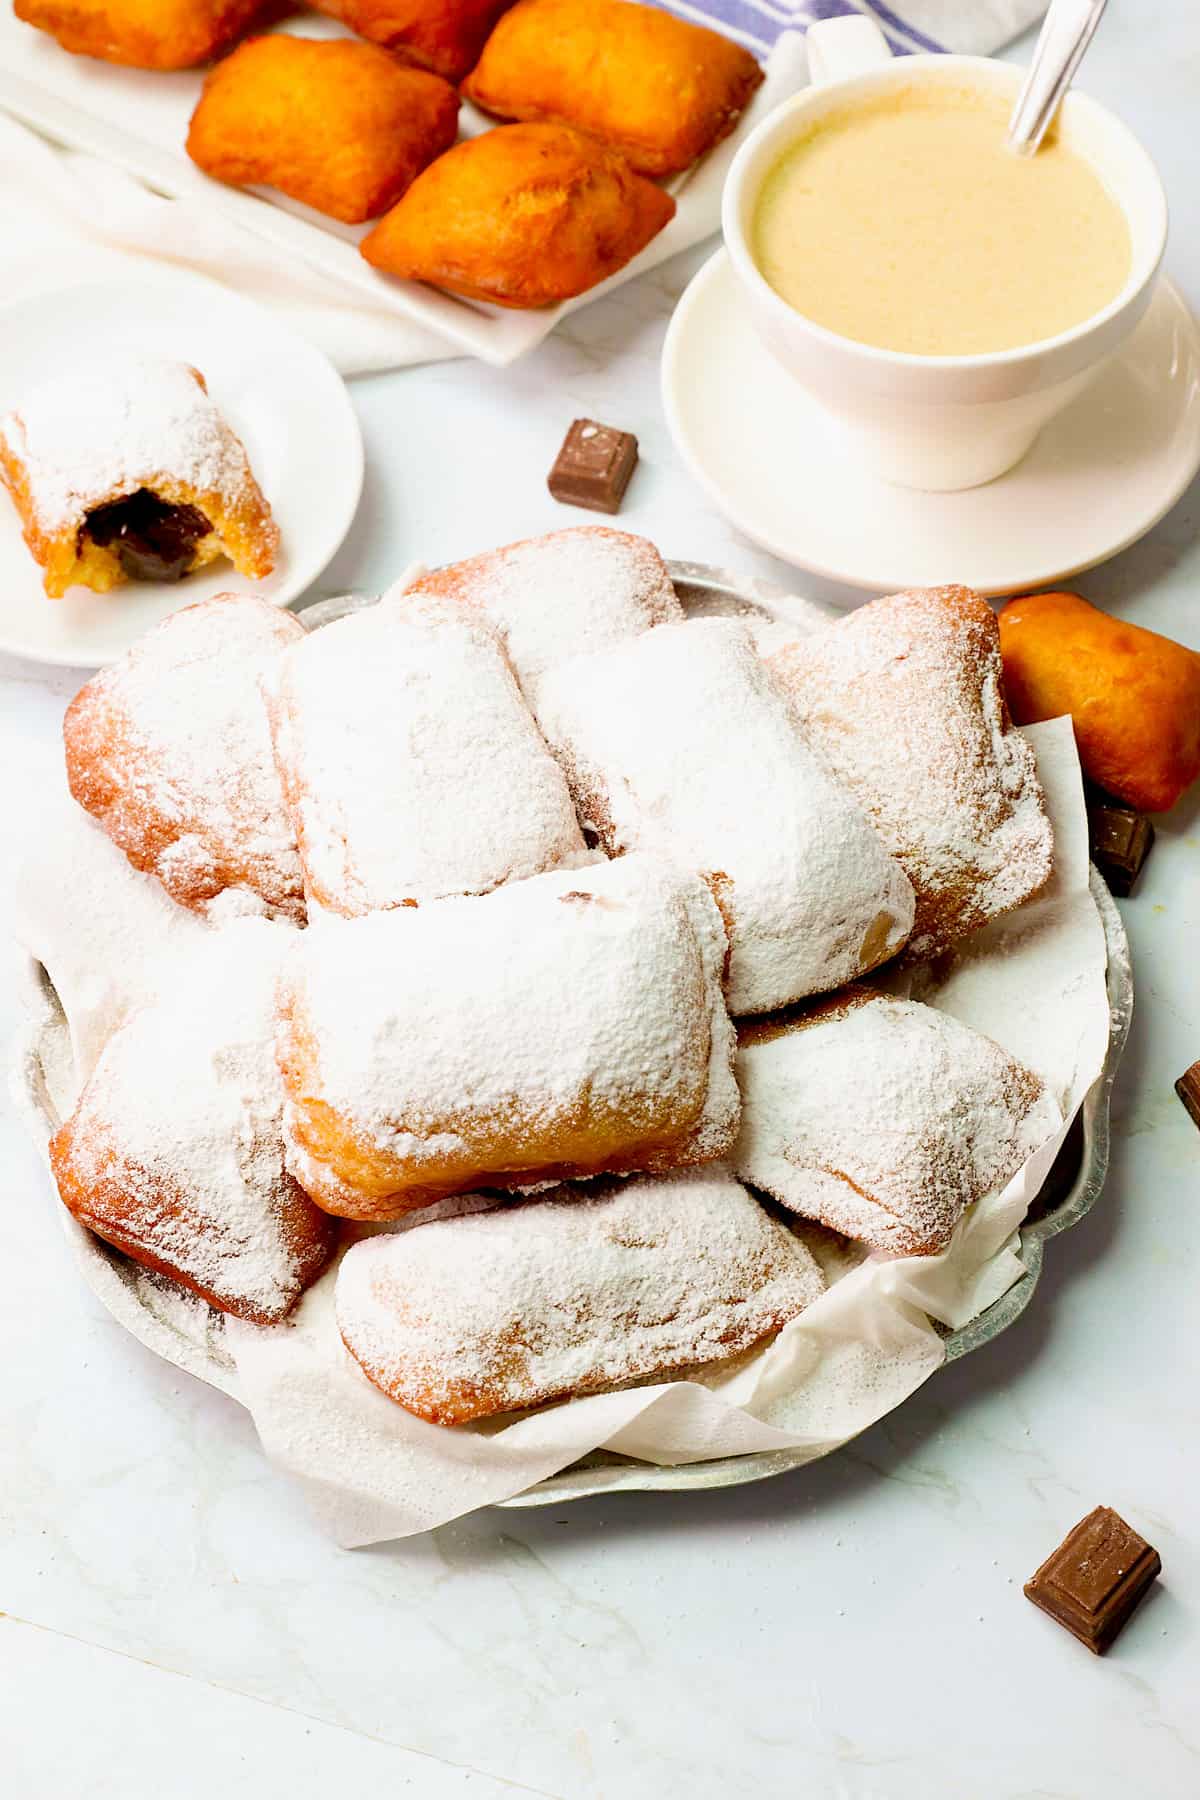 Delicious chocolate beignets and steaming cafe au latte